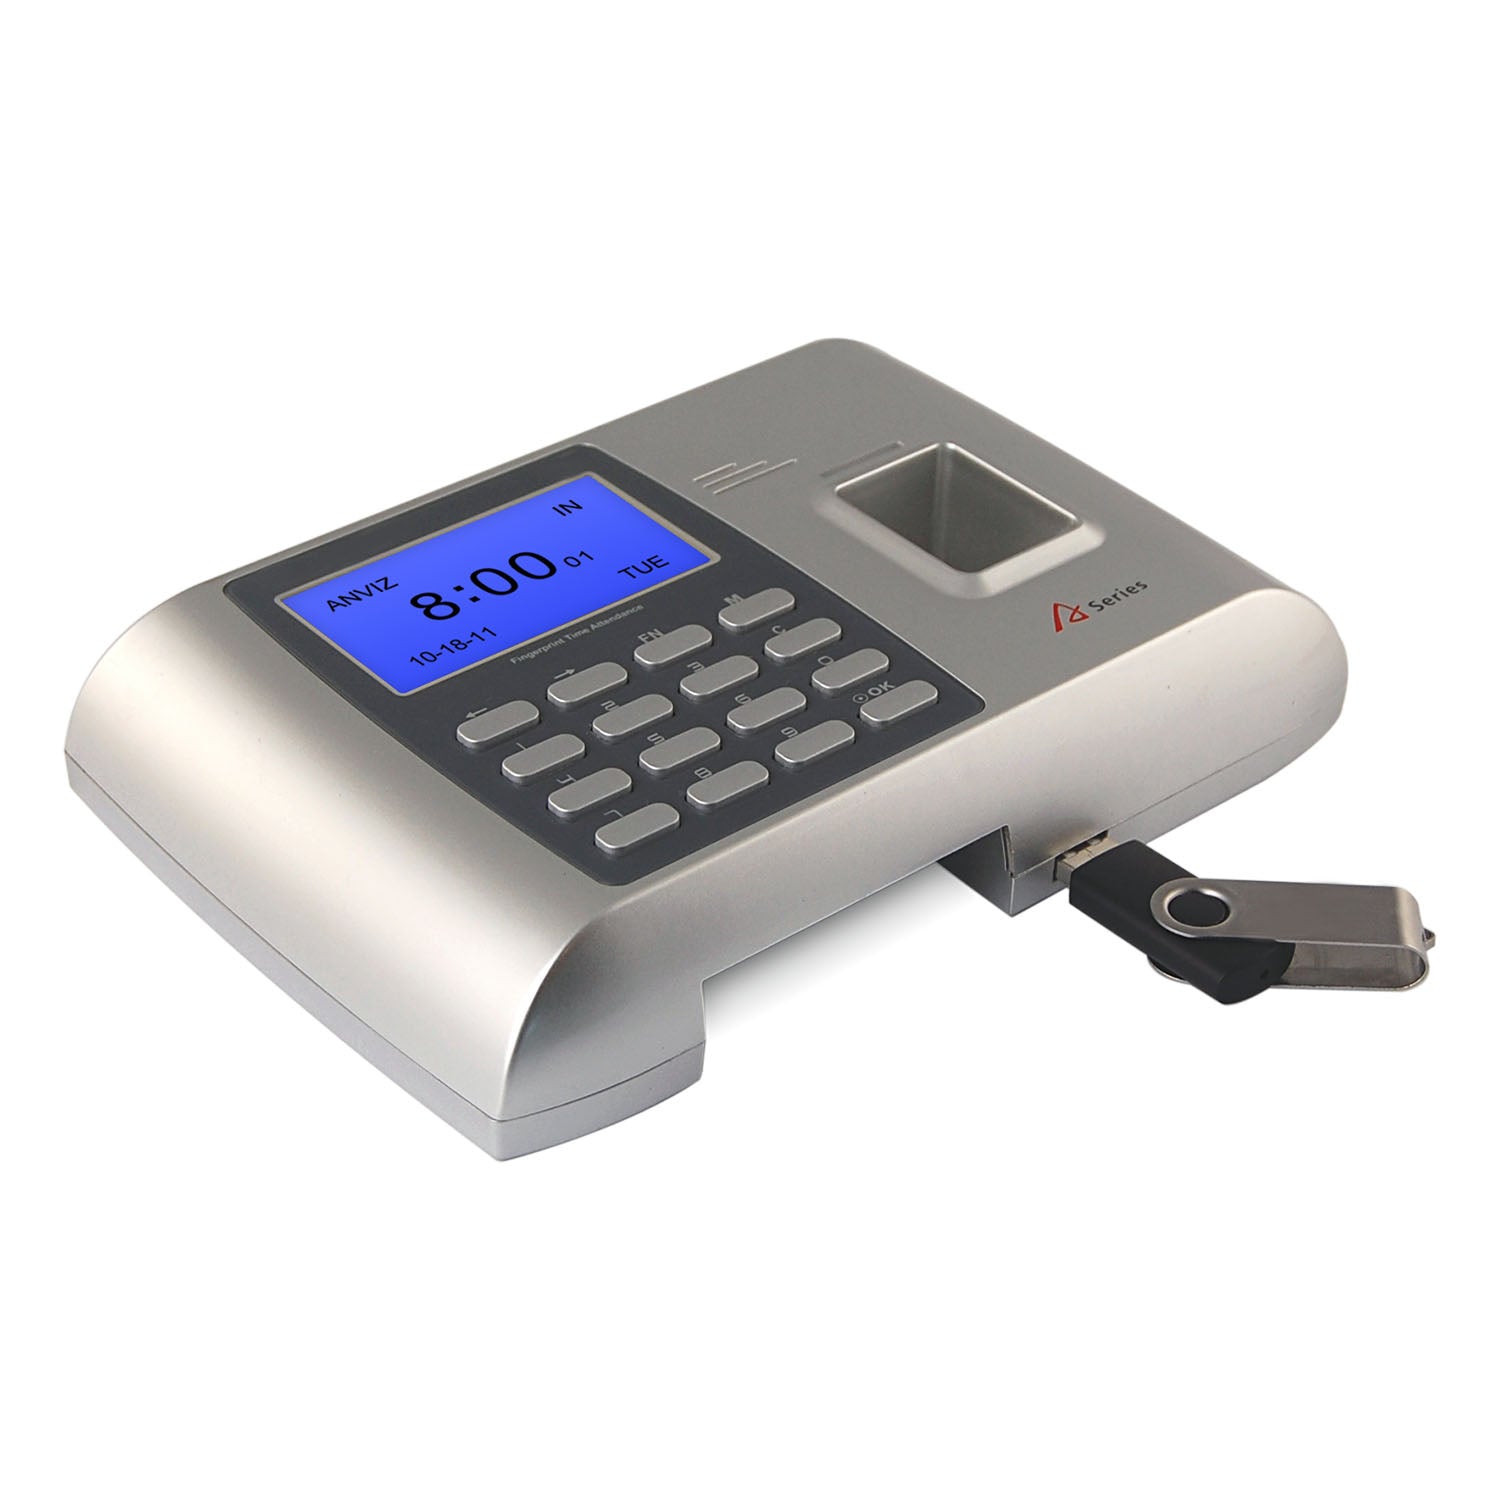 ANVIZ Attendance Control Terminal - Fingerprints, RFID cards and keyboard - 2000 records / 50000 logs - TCP/IP, USB, RS232, siren relay - 8 Attendance Control Modes - Free CrossChex Software